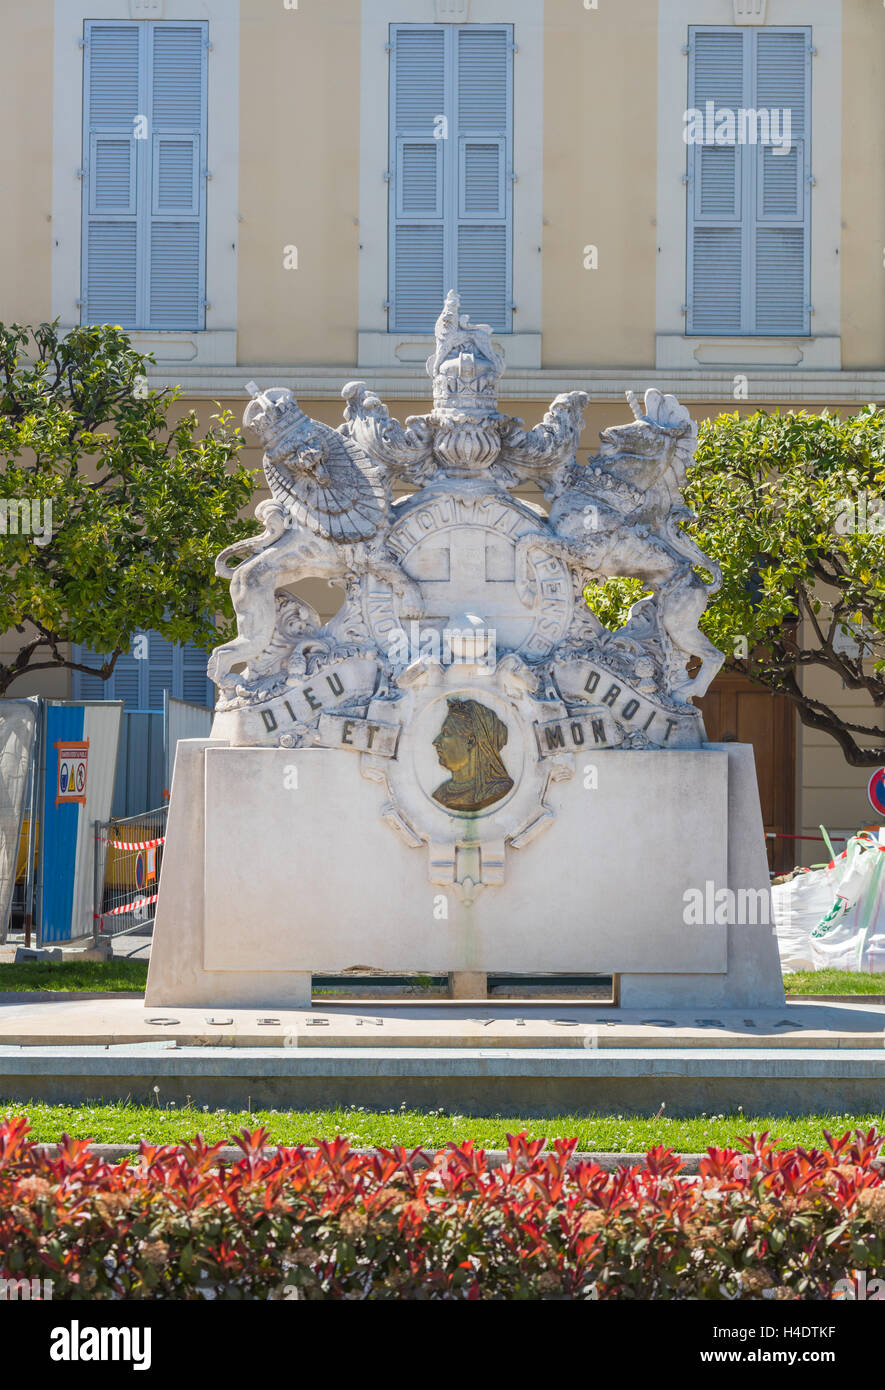 Monument to Queen Victoria, Menton, Alpes-Maritimes department,  Provence-Alpes-Cote d'Azur, French Riviera, France Stock Photo - Alamy